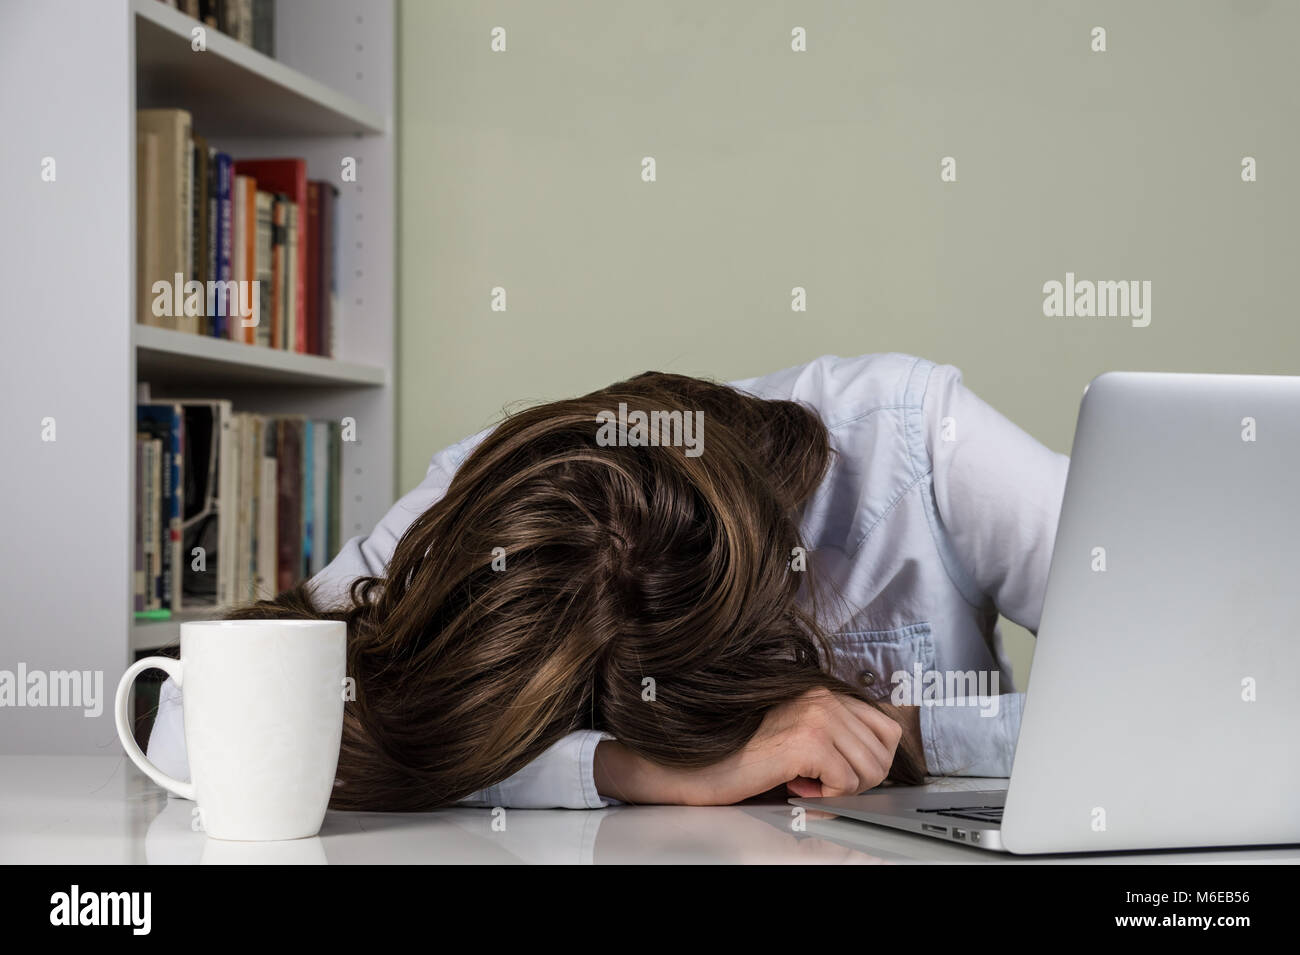 Tired Girl Sleeping At Desk In Front Of Laptop Computer And Tablet